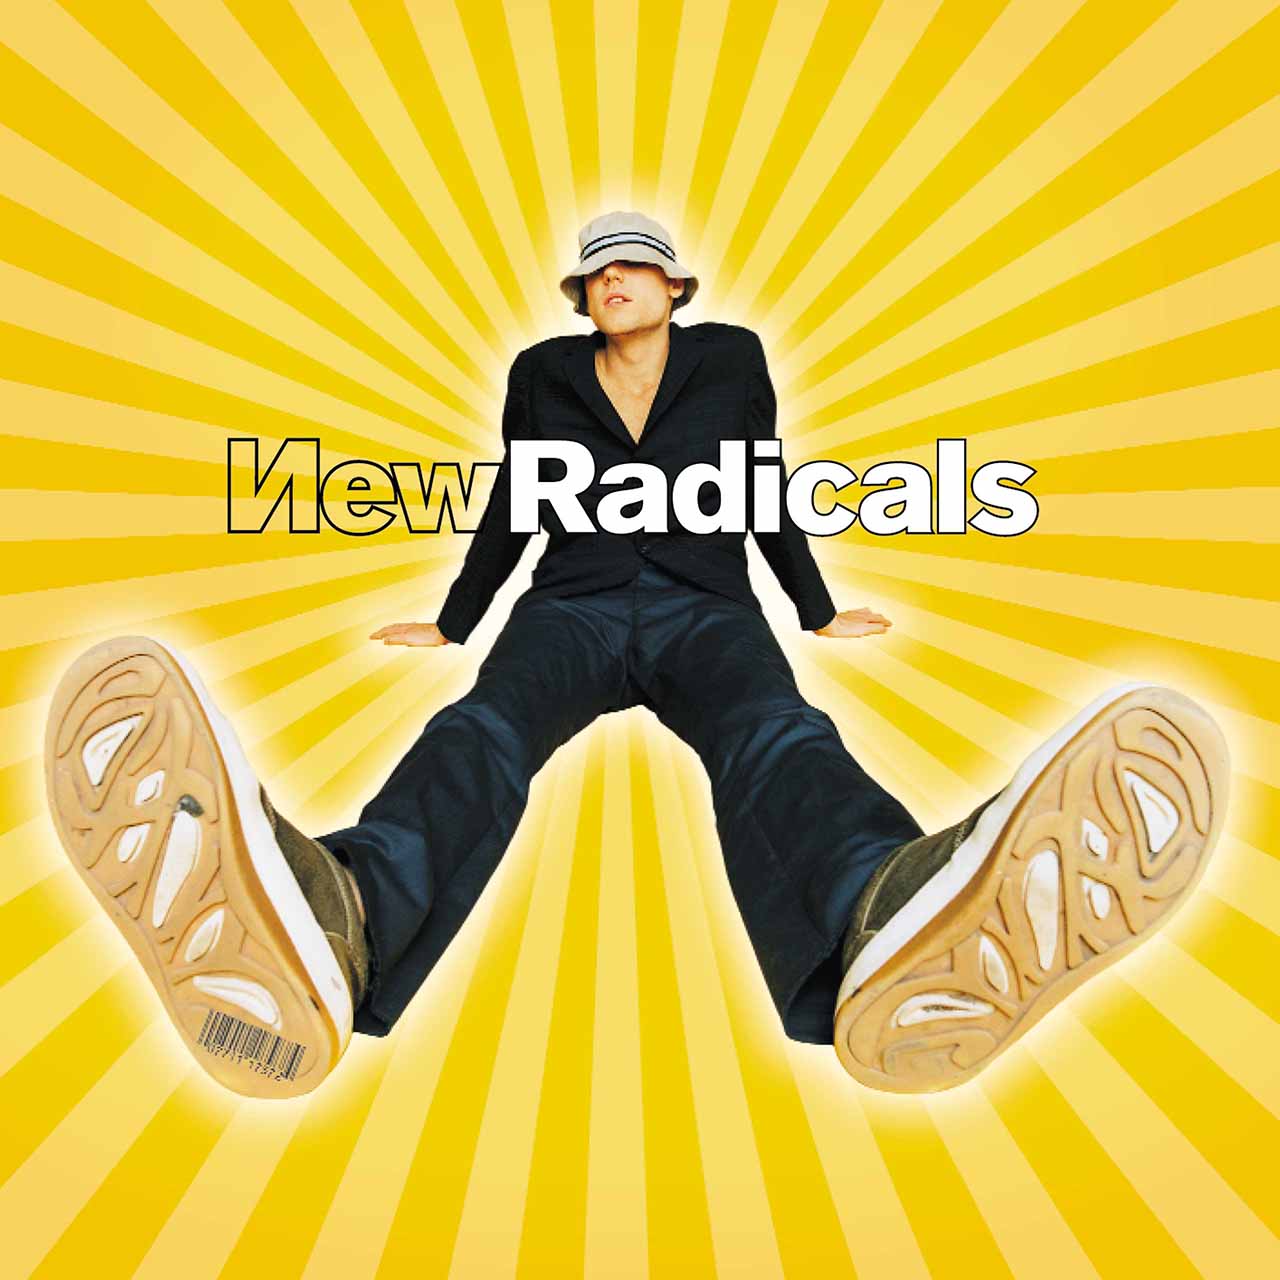 ‘Maybe You’ve Been Brainwashed Too’: The Iconic New Radicals Album